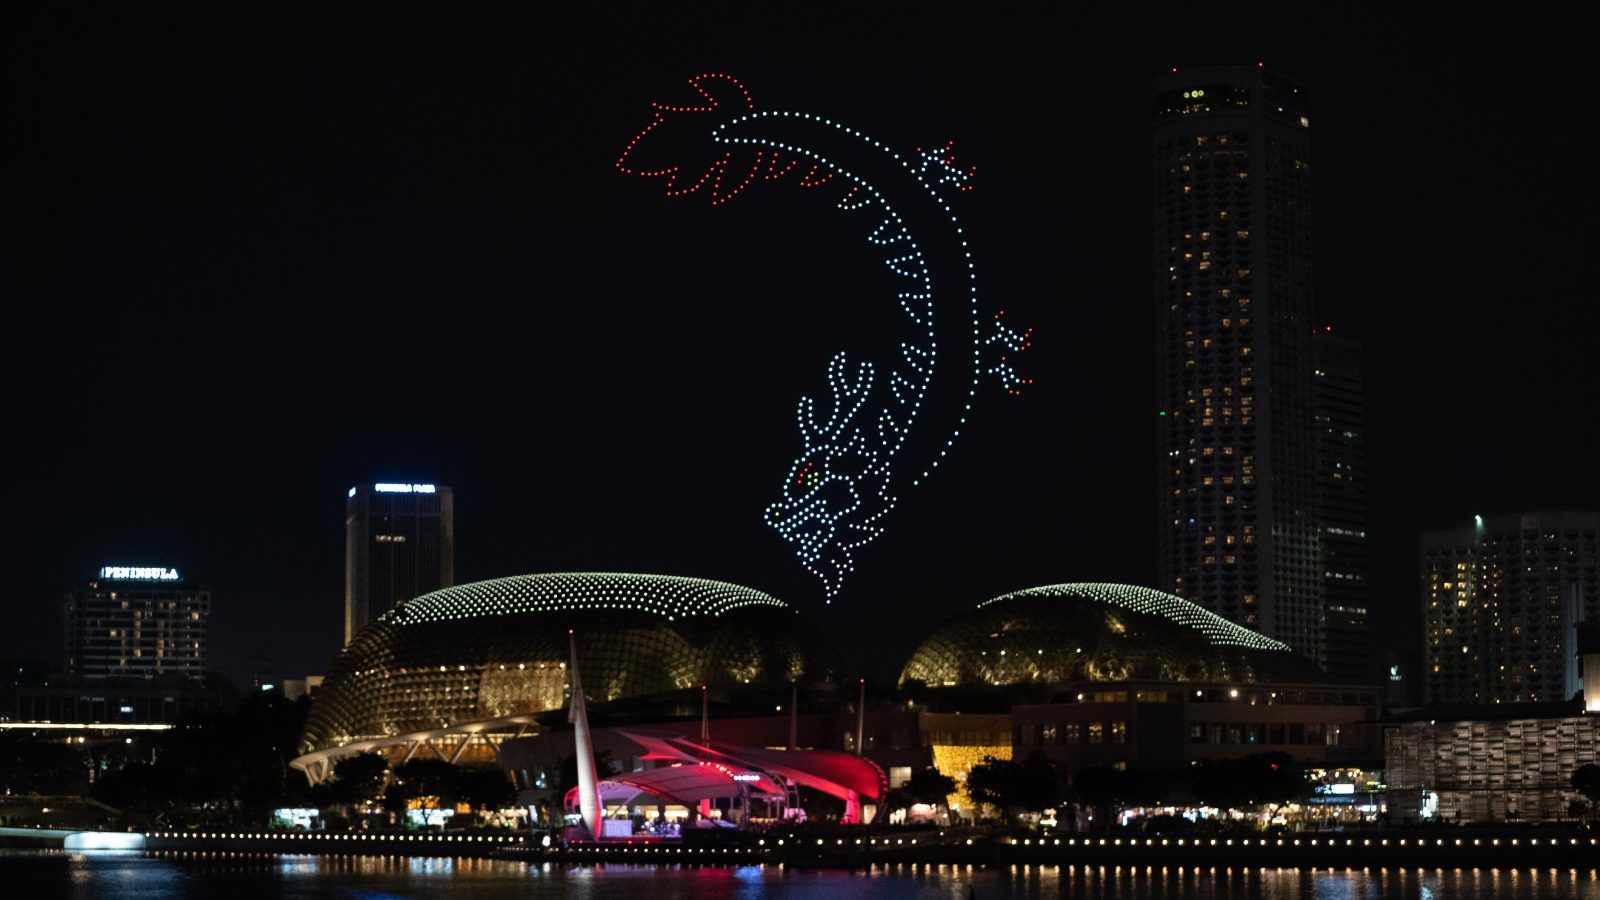 Hennessy Celebrates Year of the Dragon With Drone Show in Singapore